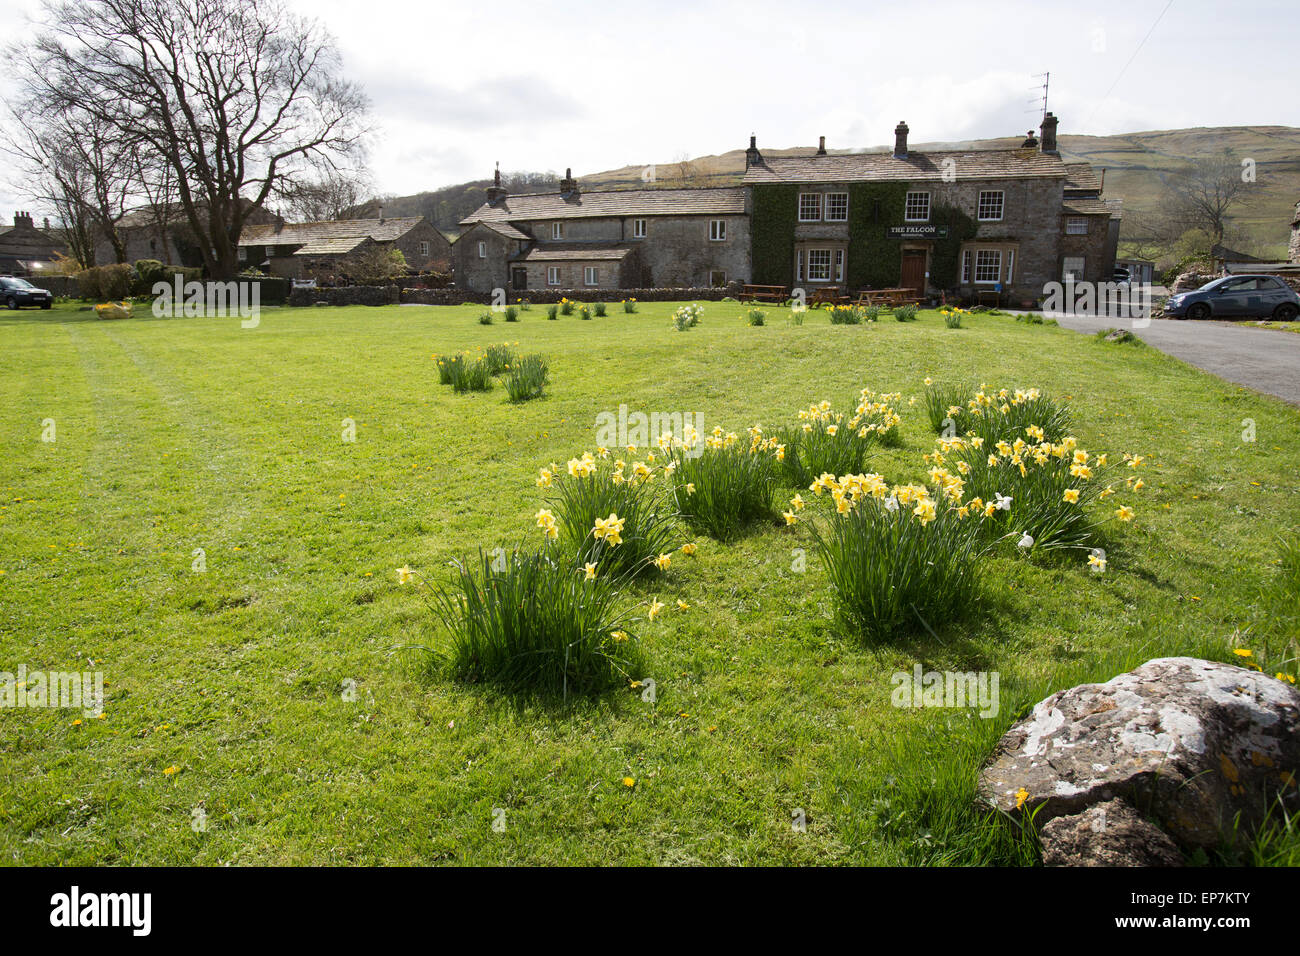 Yorkshire Dales, England. Picturesque spring view of the Falcon Inn in the Yorkshire village of Arncliffe. Stock Photo